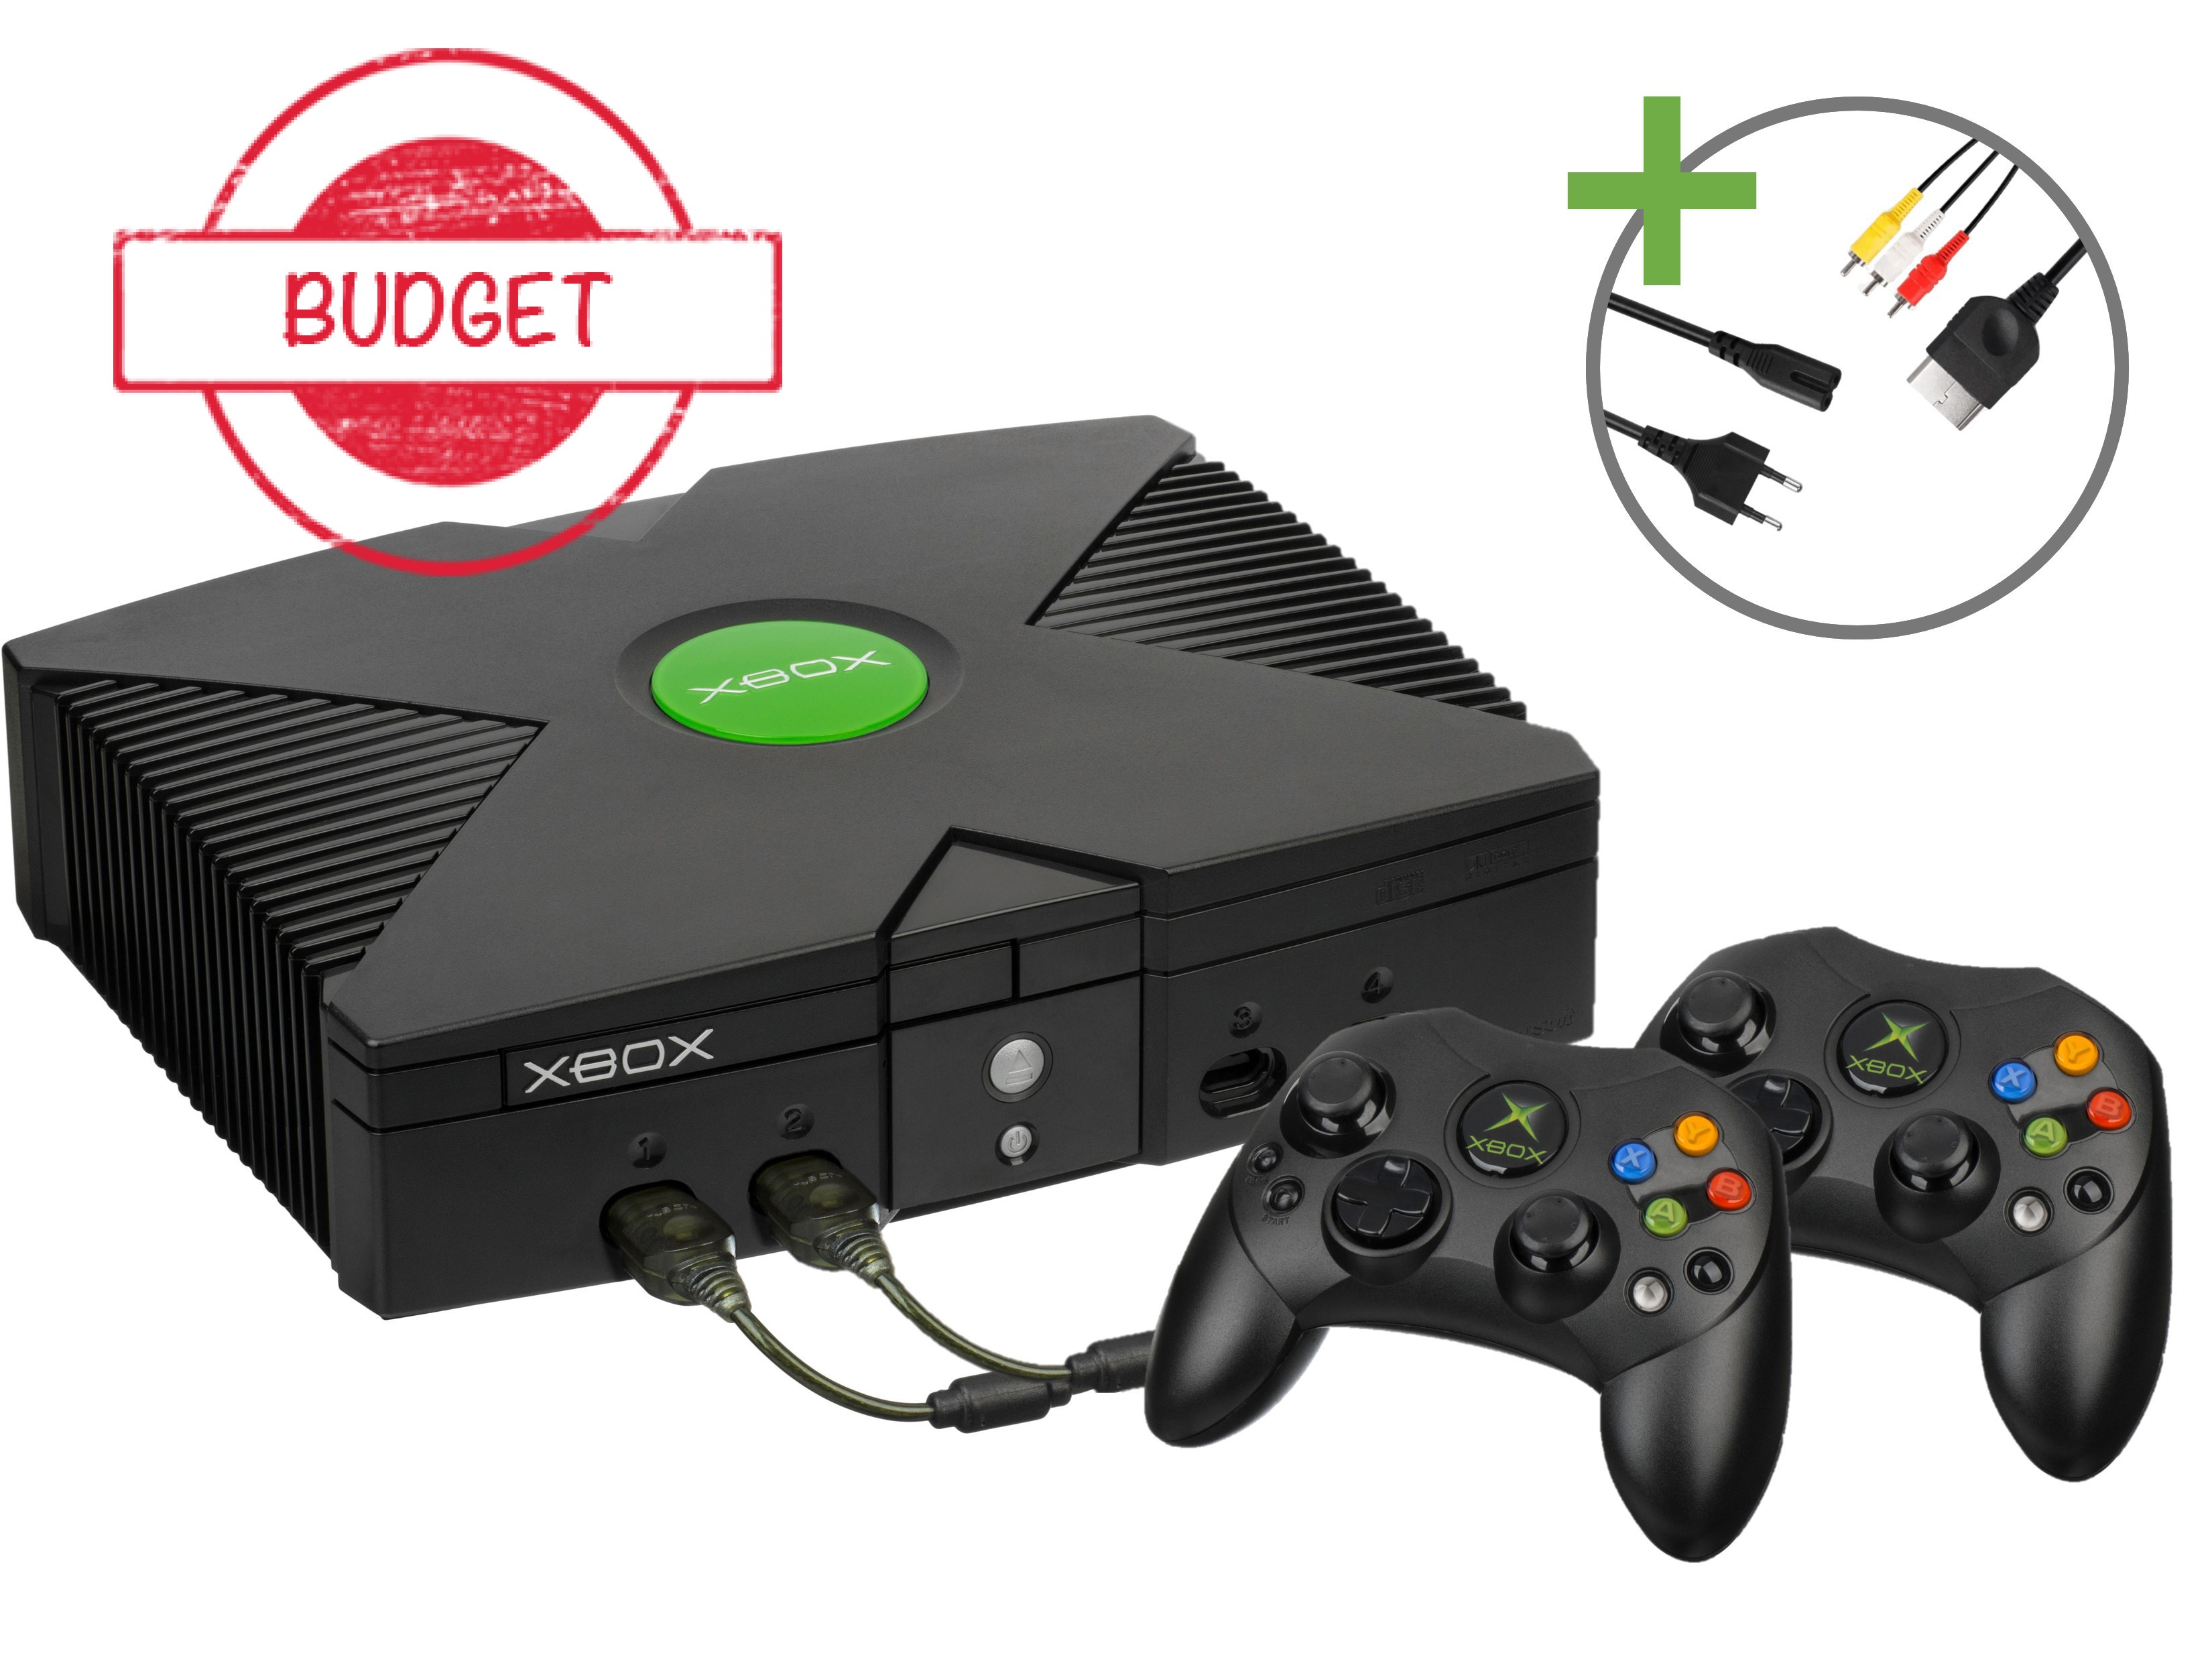 Microsoft Xbox Classic Starter Pack - Two Player Edition - Budget - Xbox Original Hardware